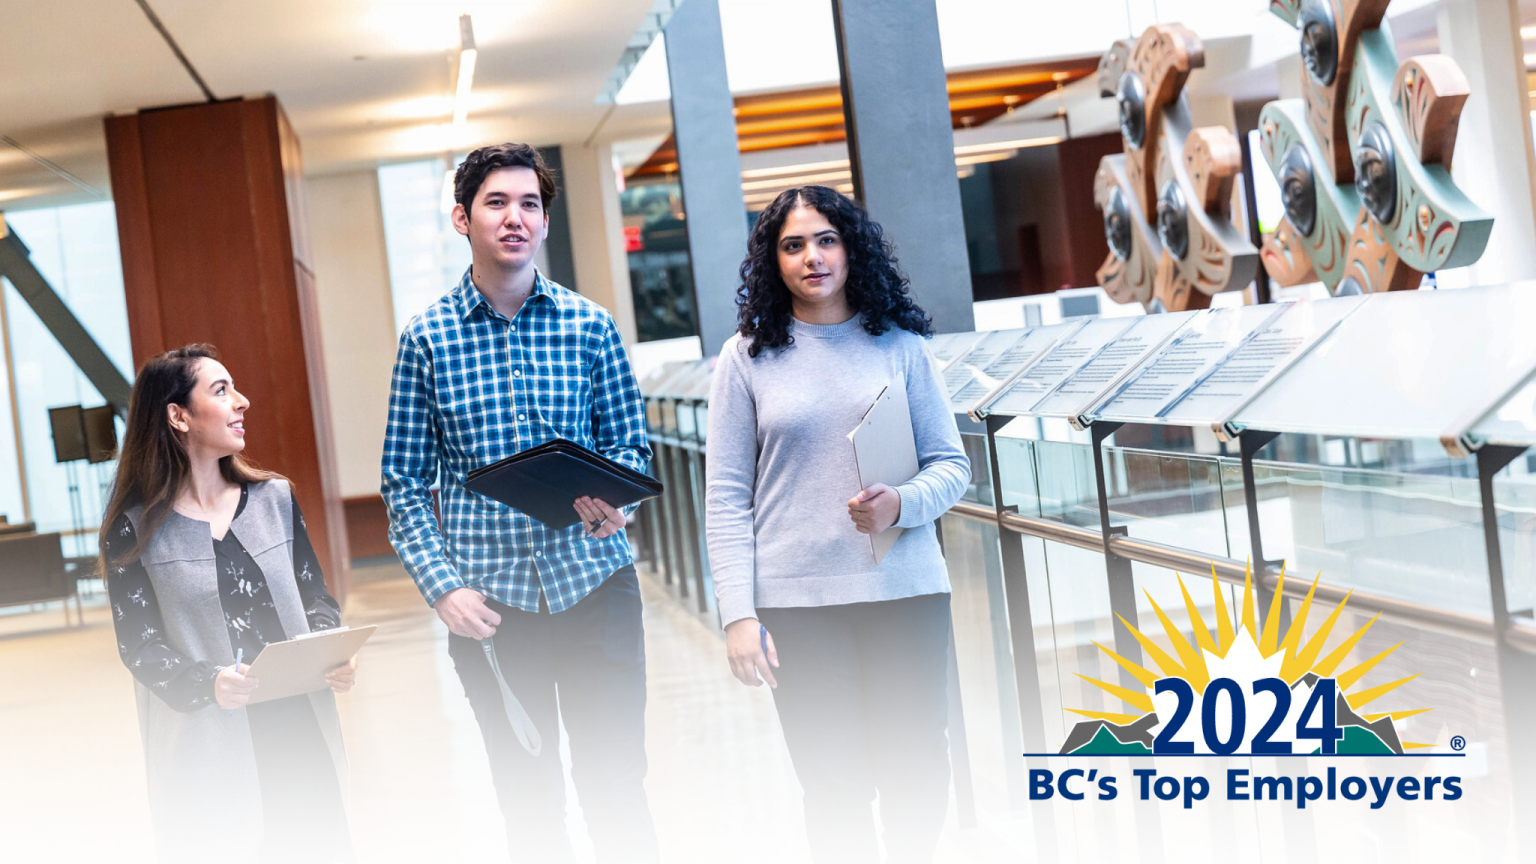 UBC recognized as one of BC’s Top Employers in 2024